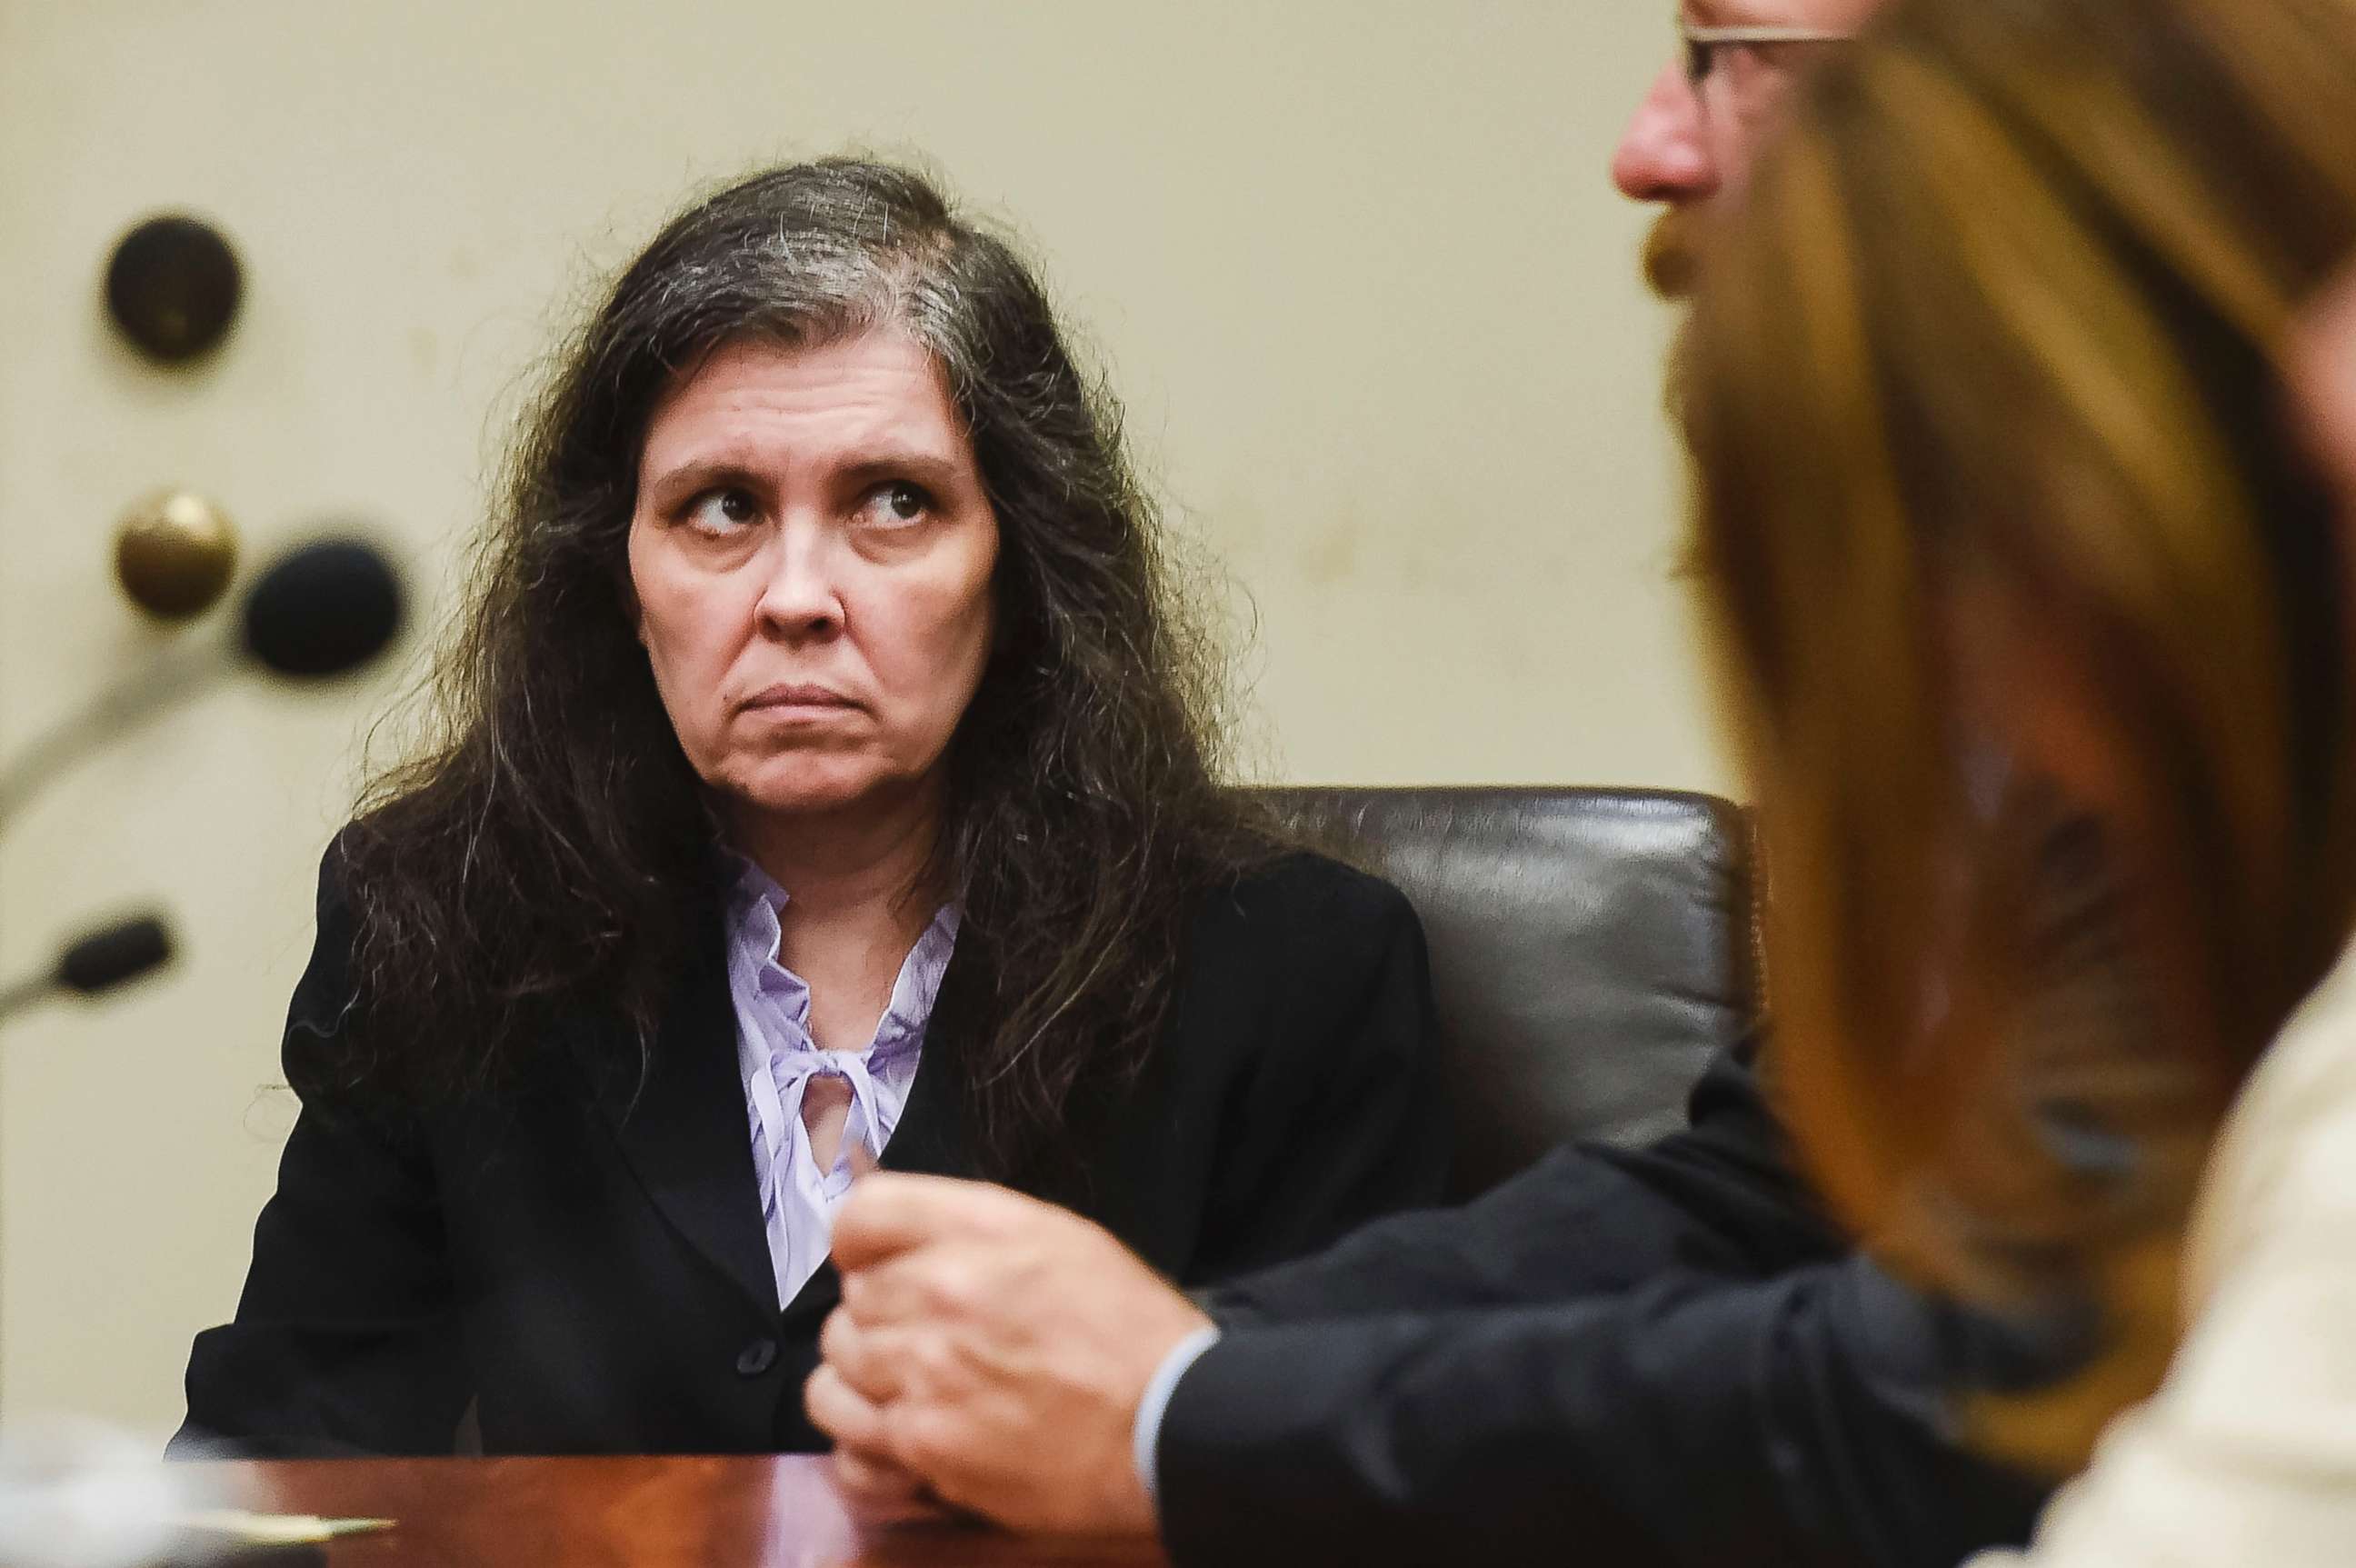 PHOTO: Louise Turpin appears in Riverside Superior Court during an information hearing in Riverside, Calif. Aug. 3, 2018.